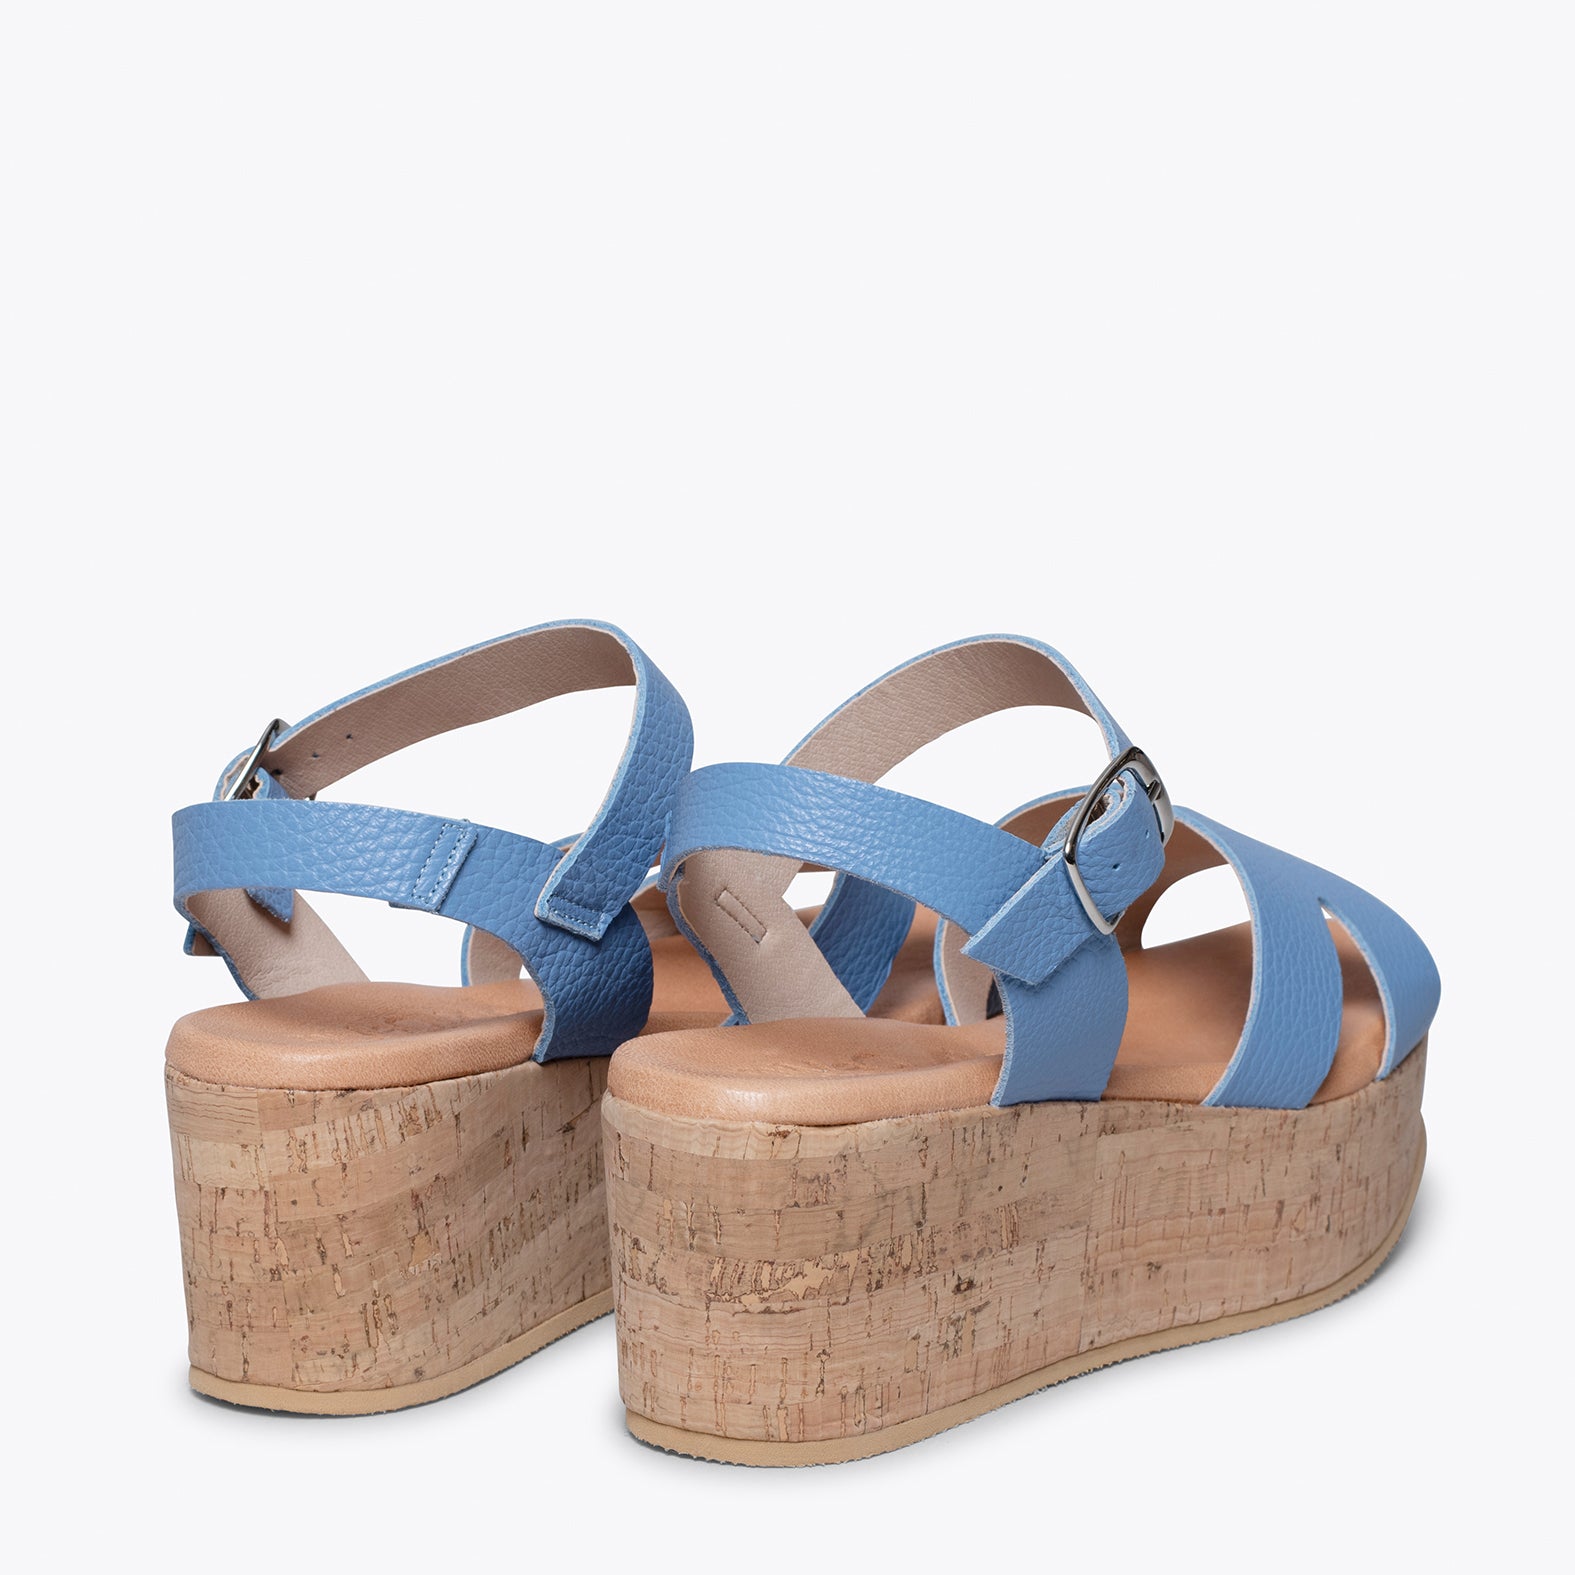 HACHE – BLUE SANDAL WITH CORK WEDGE